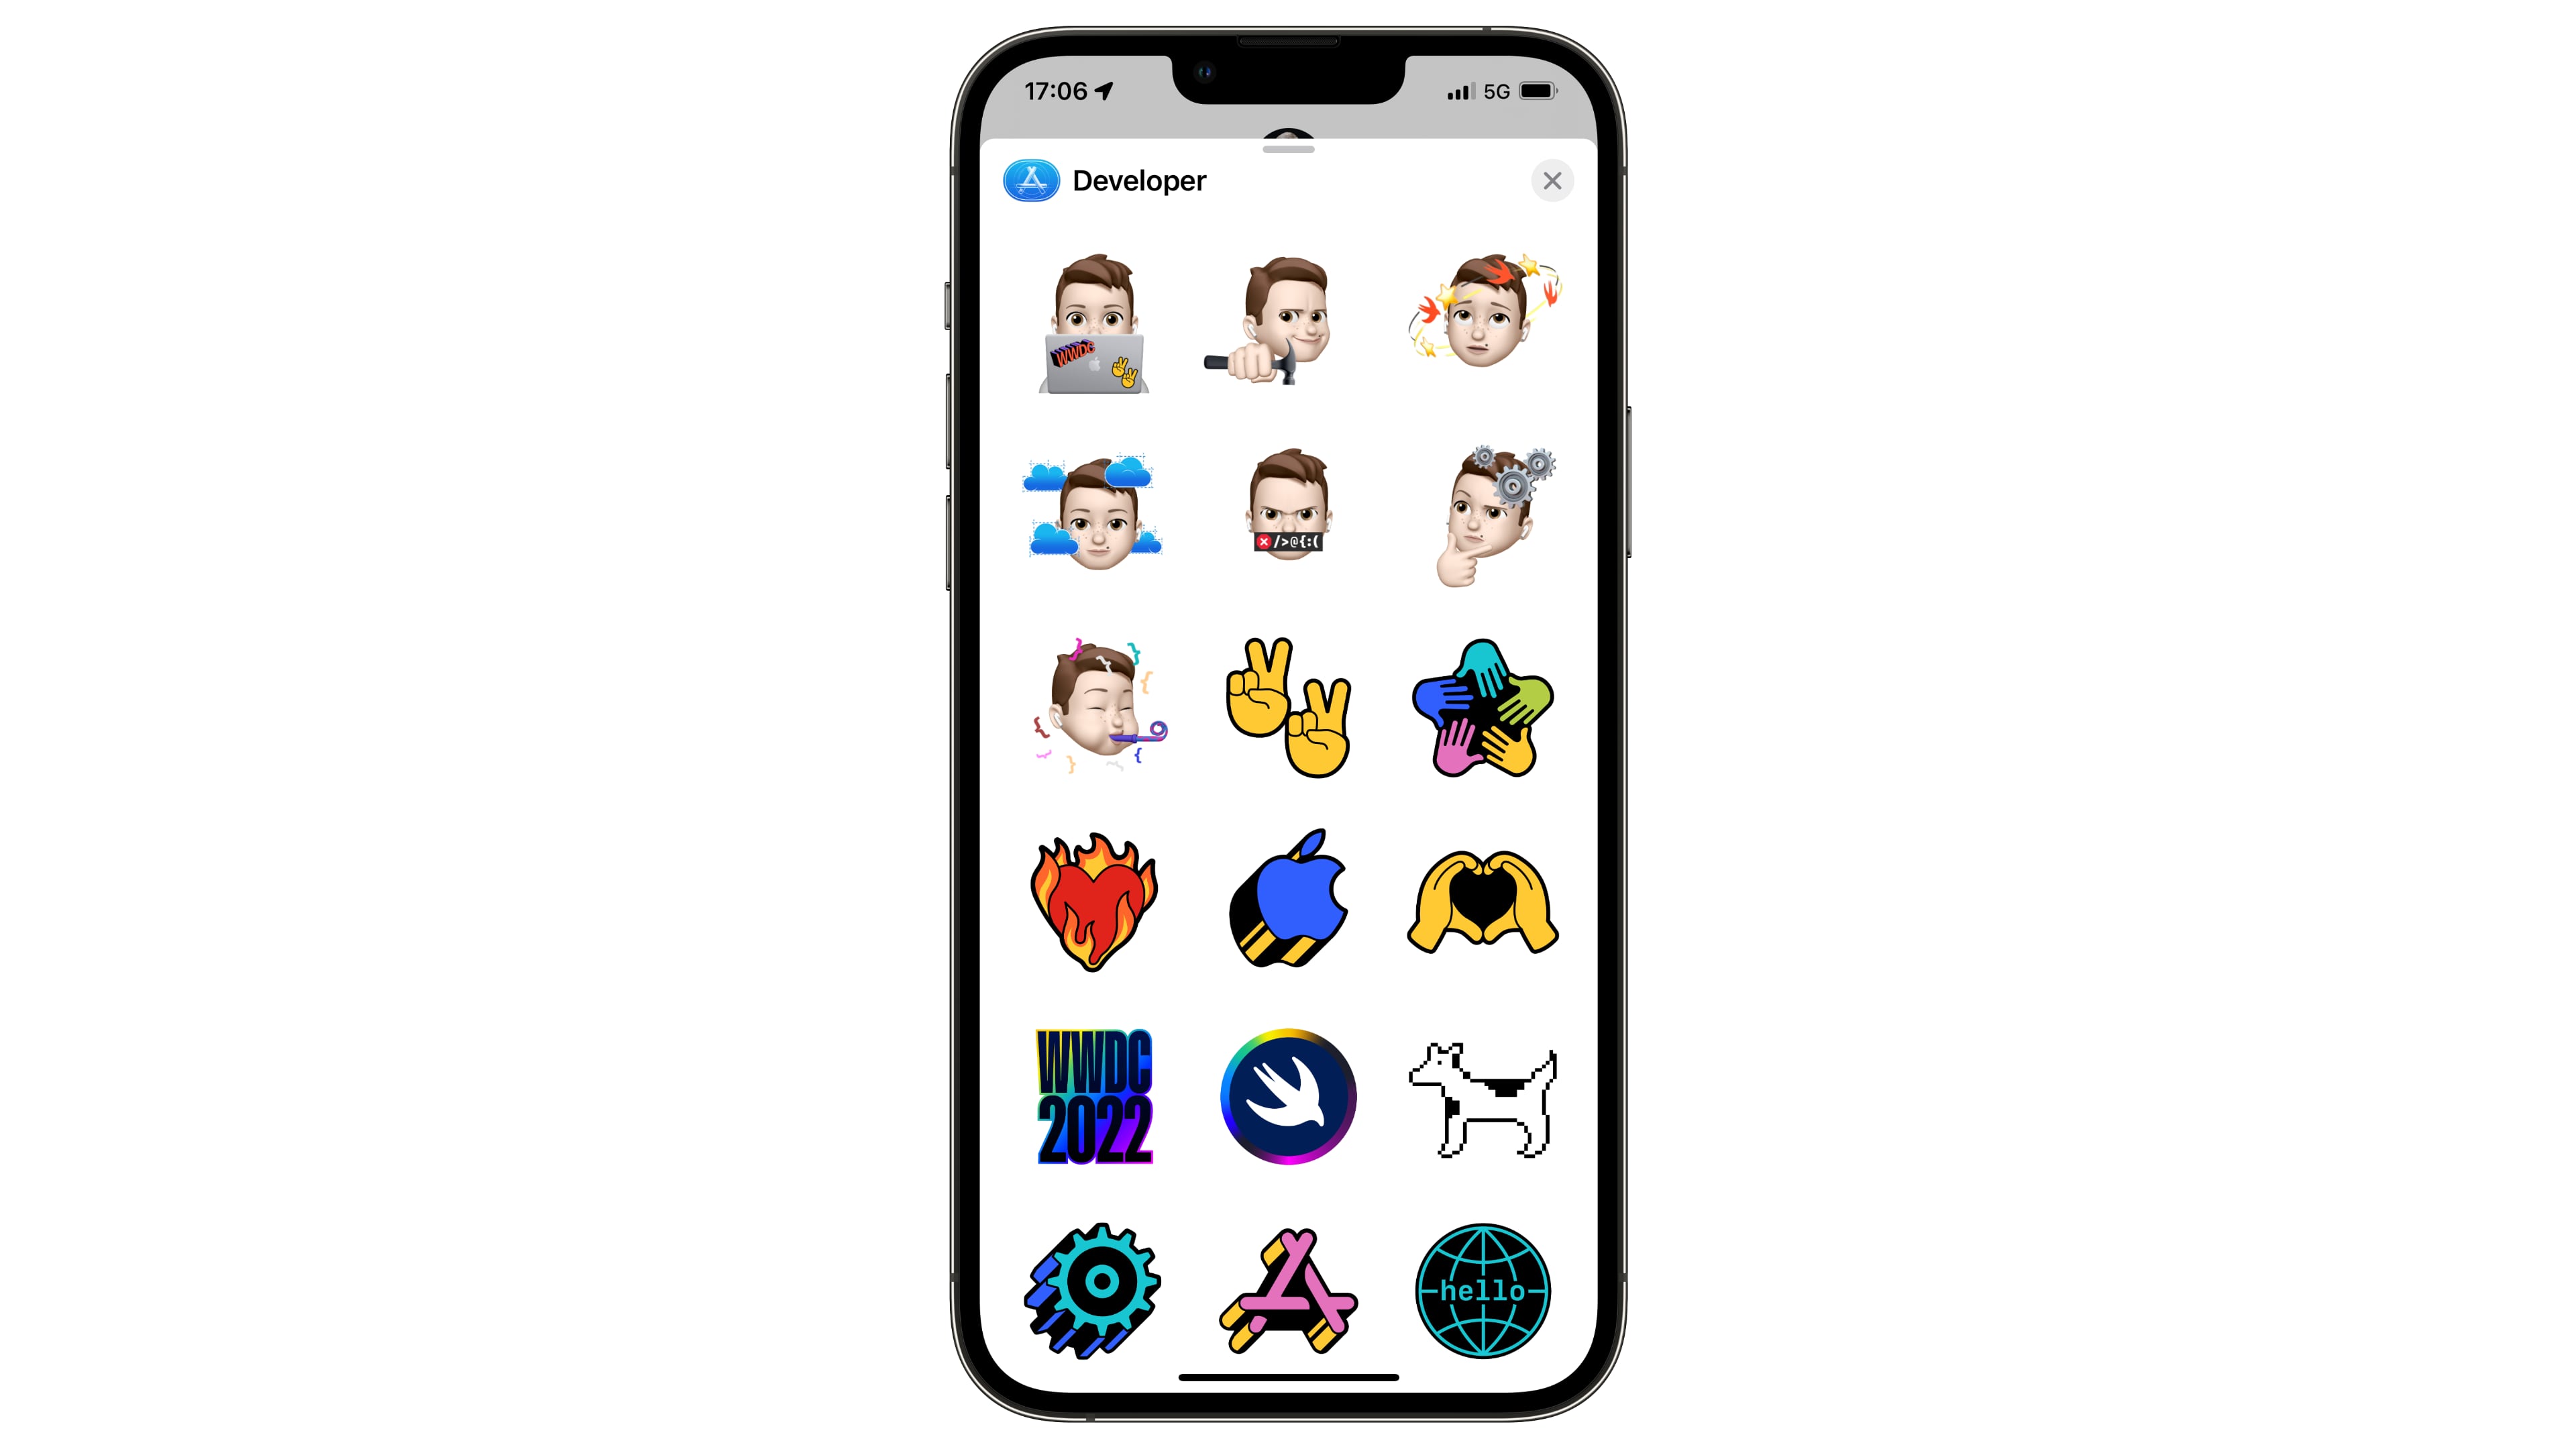 The official WWDC 2022 stickers on Apple's Messages app are showcased in this iPhone screenshot